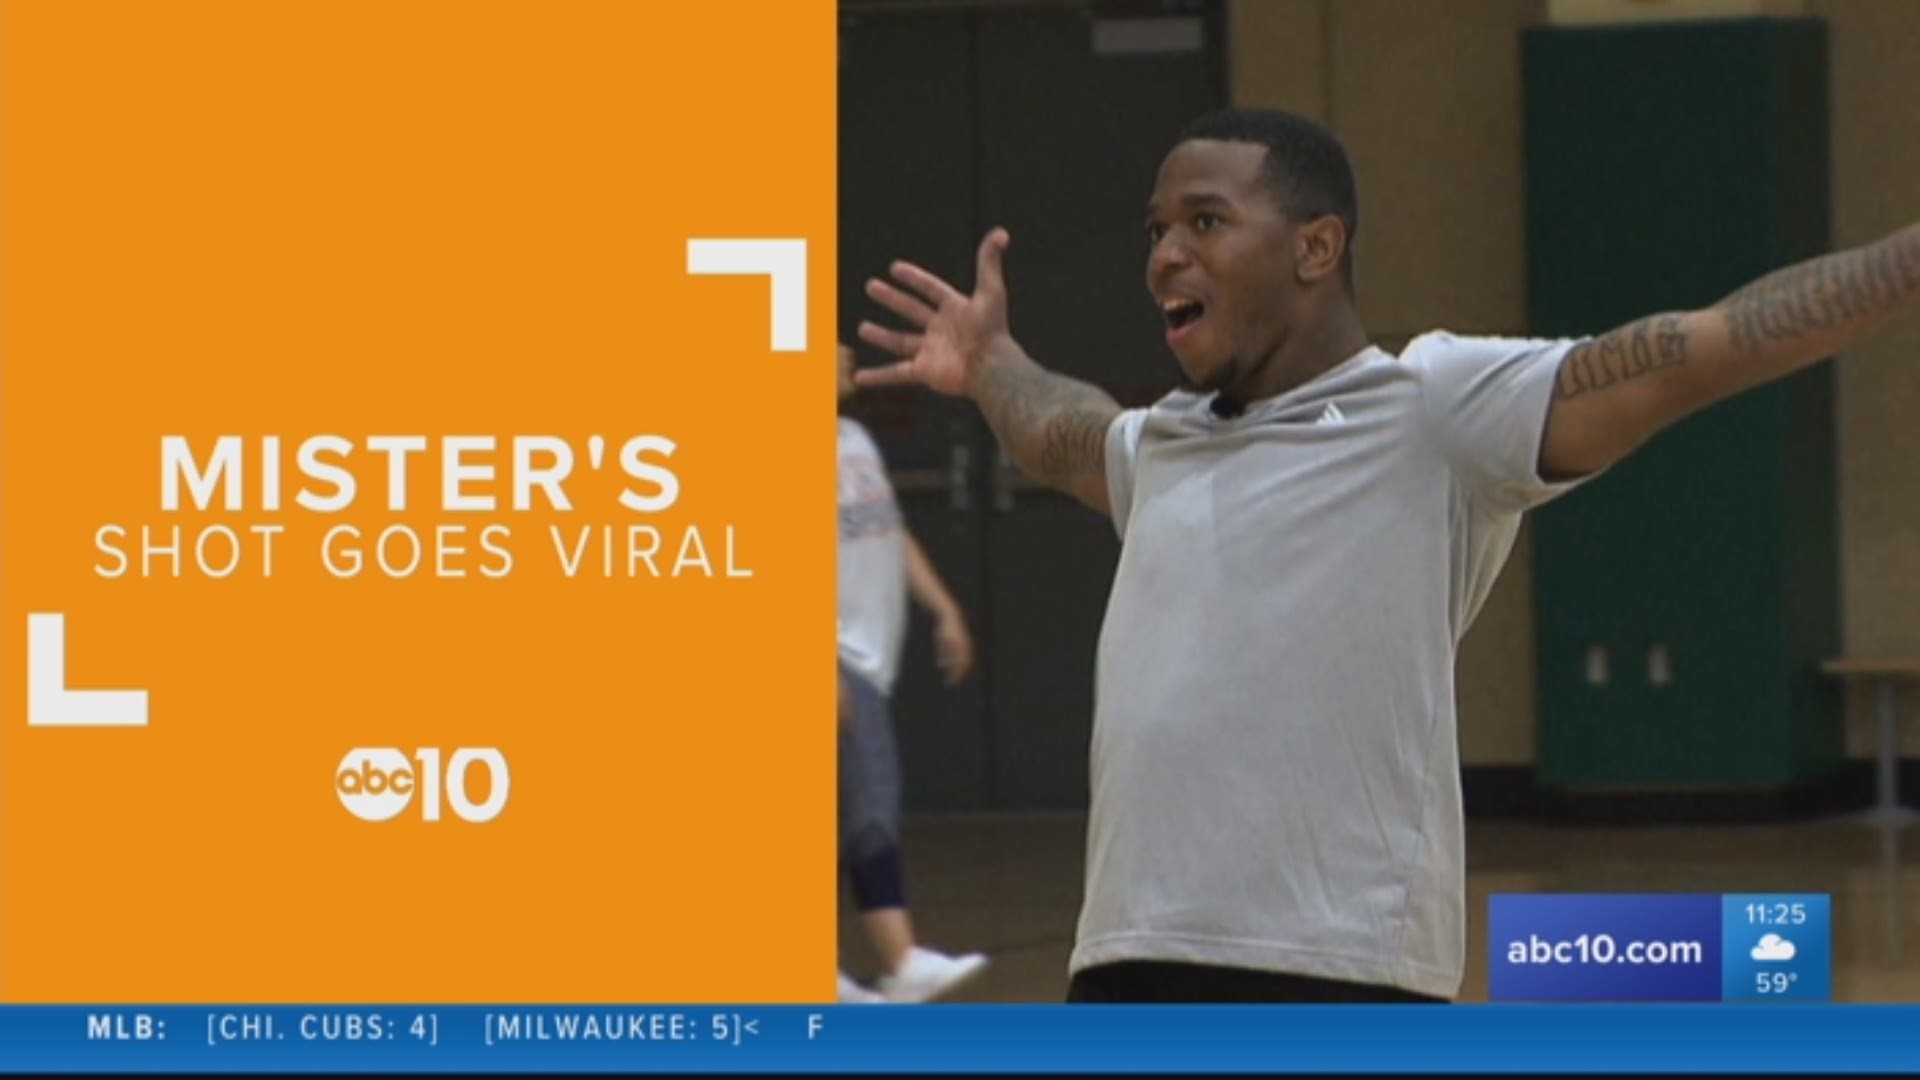 Sacramento State football player Mister Harriel, a safety for the Hornets, is putting his University in the national spotlight for his viral videos of trick shots on the basketball court.